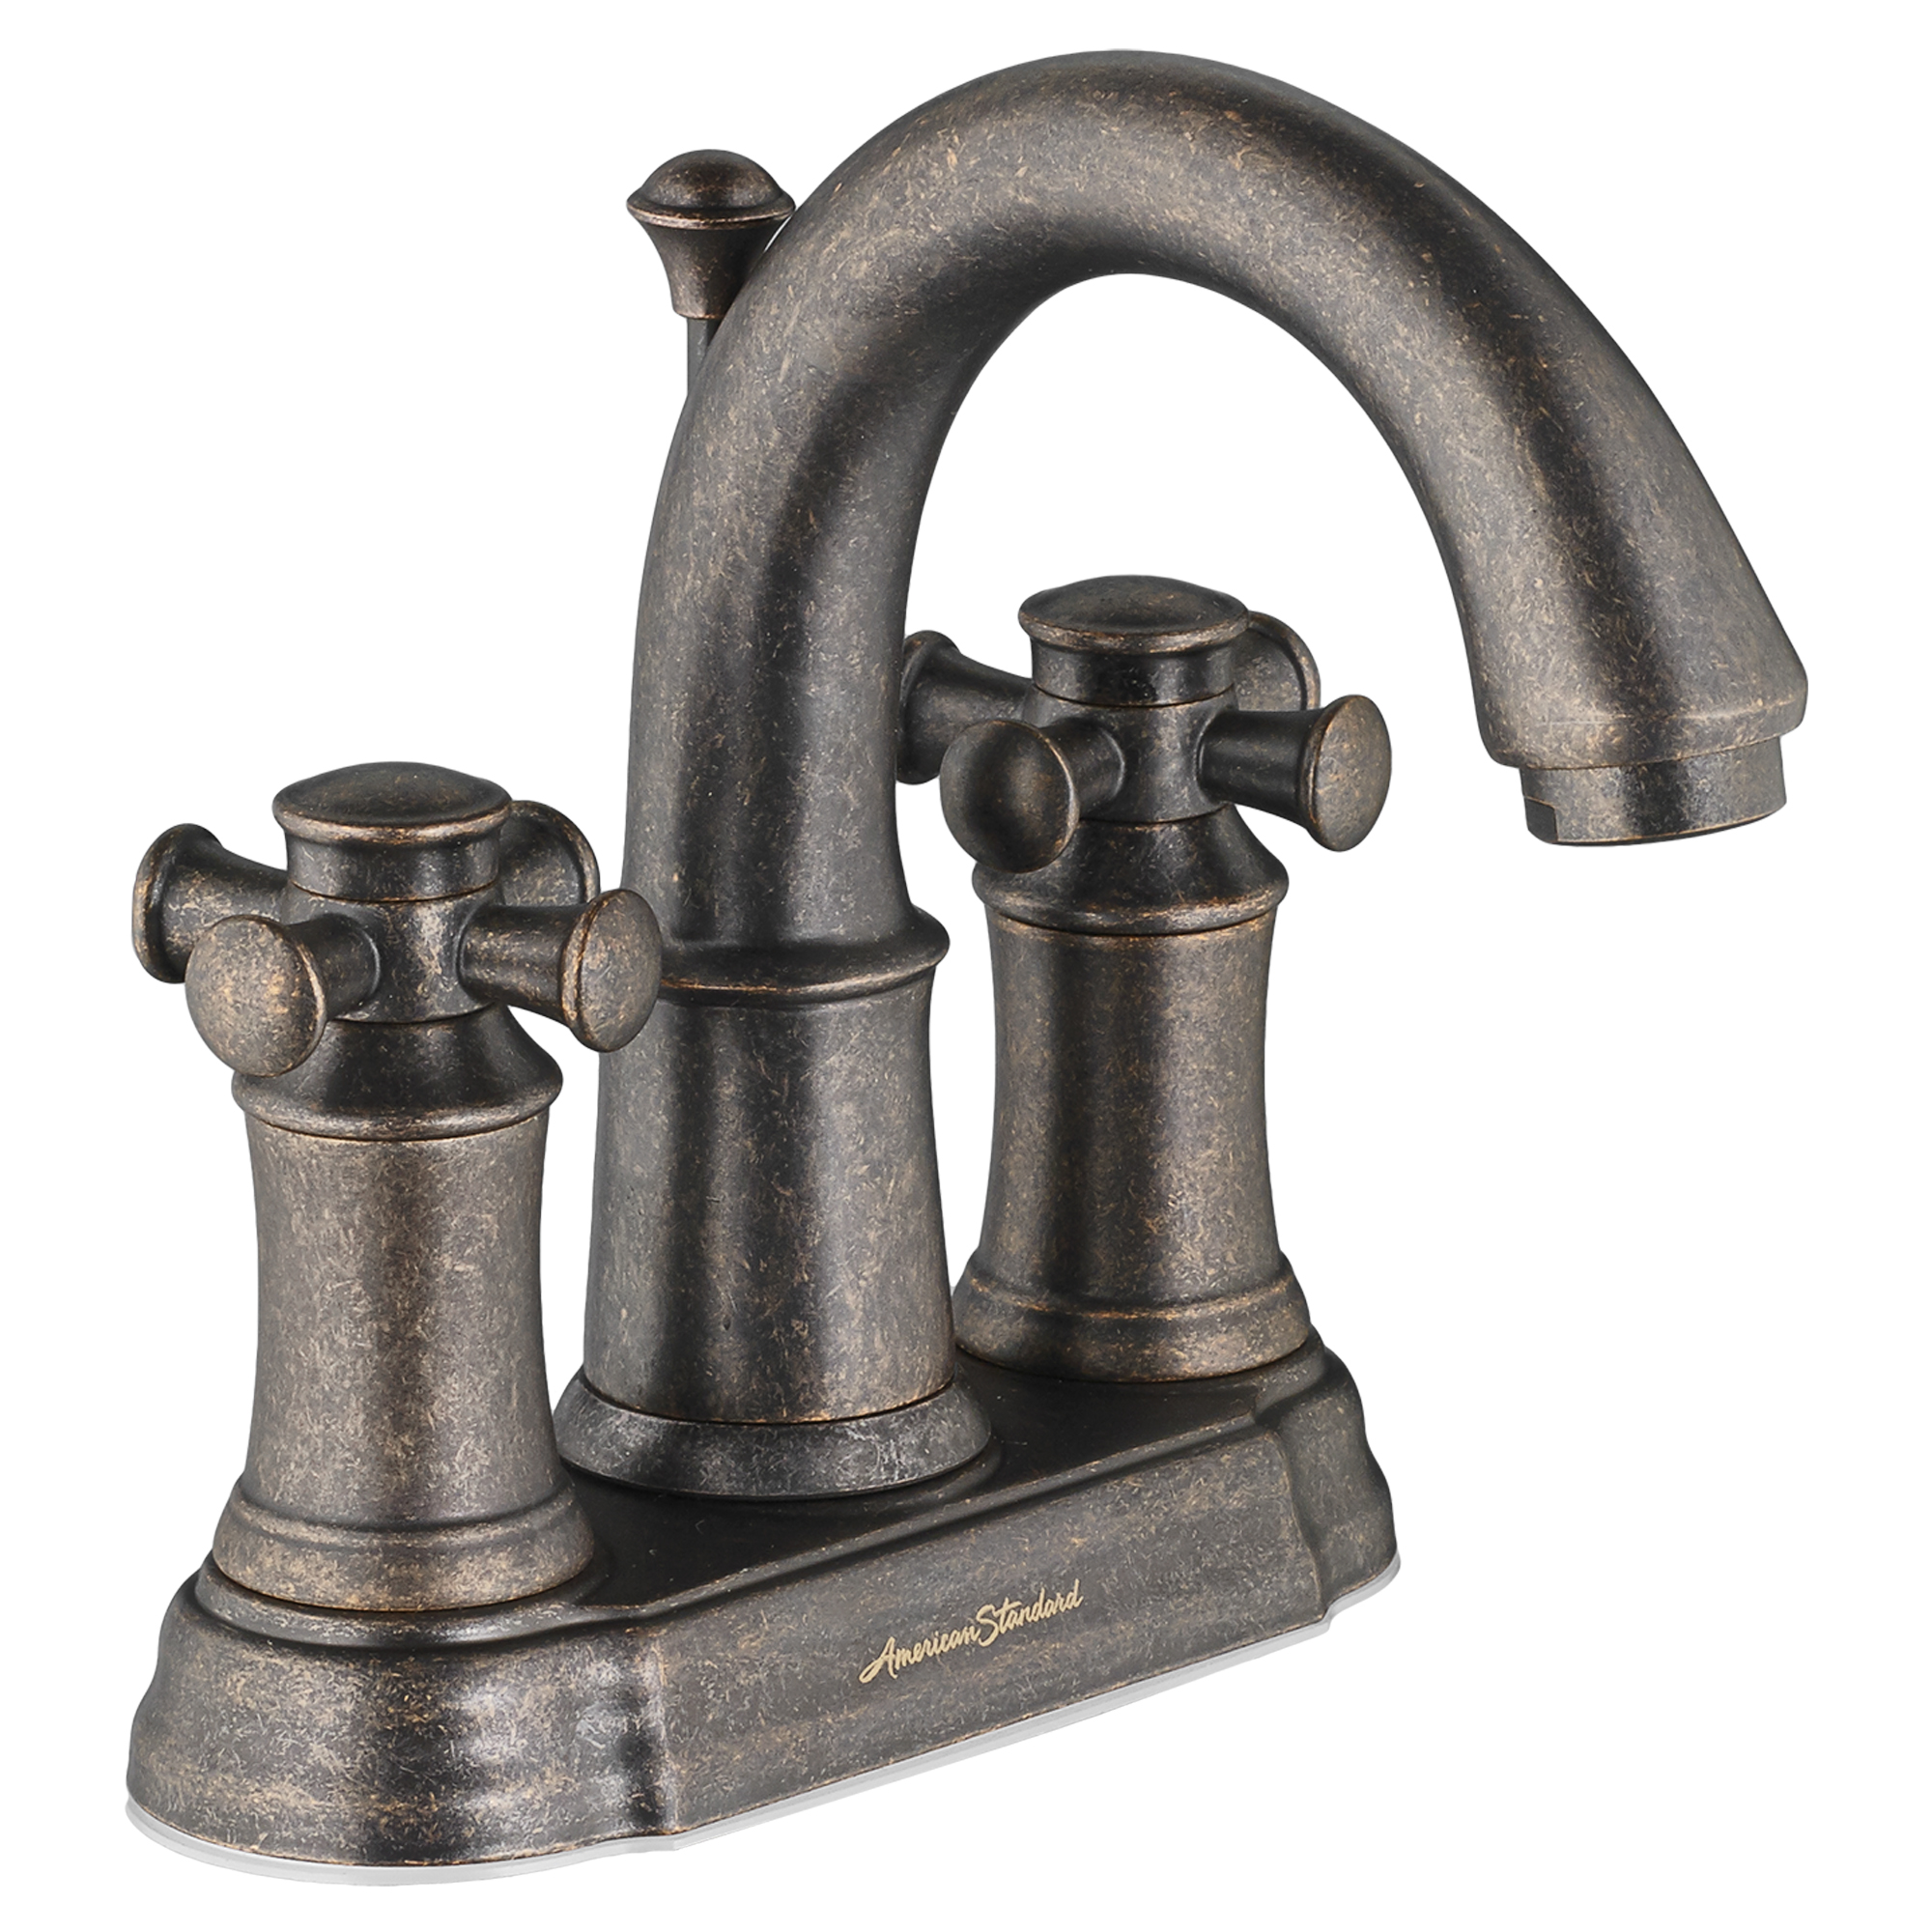 Portsmouth 4-In. Centerset 2-Handle Crescent Spout Bathroom Faucet 1.2 GPM with Cross Handles